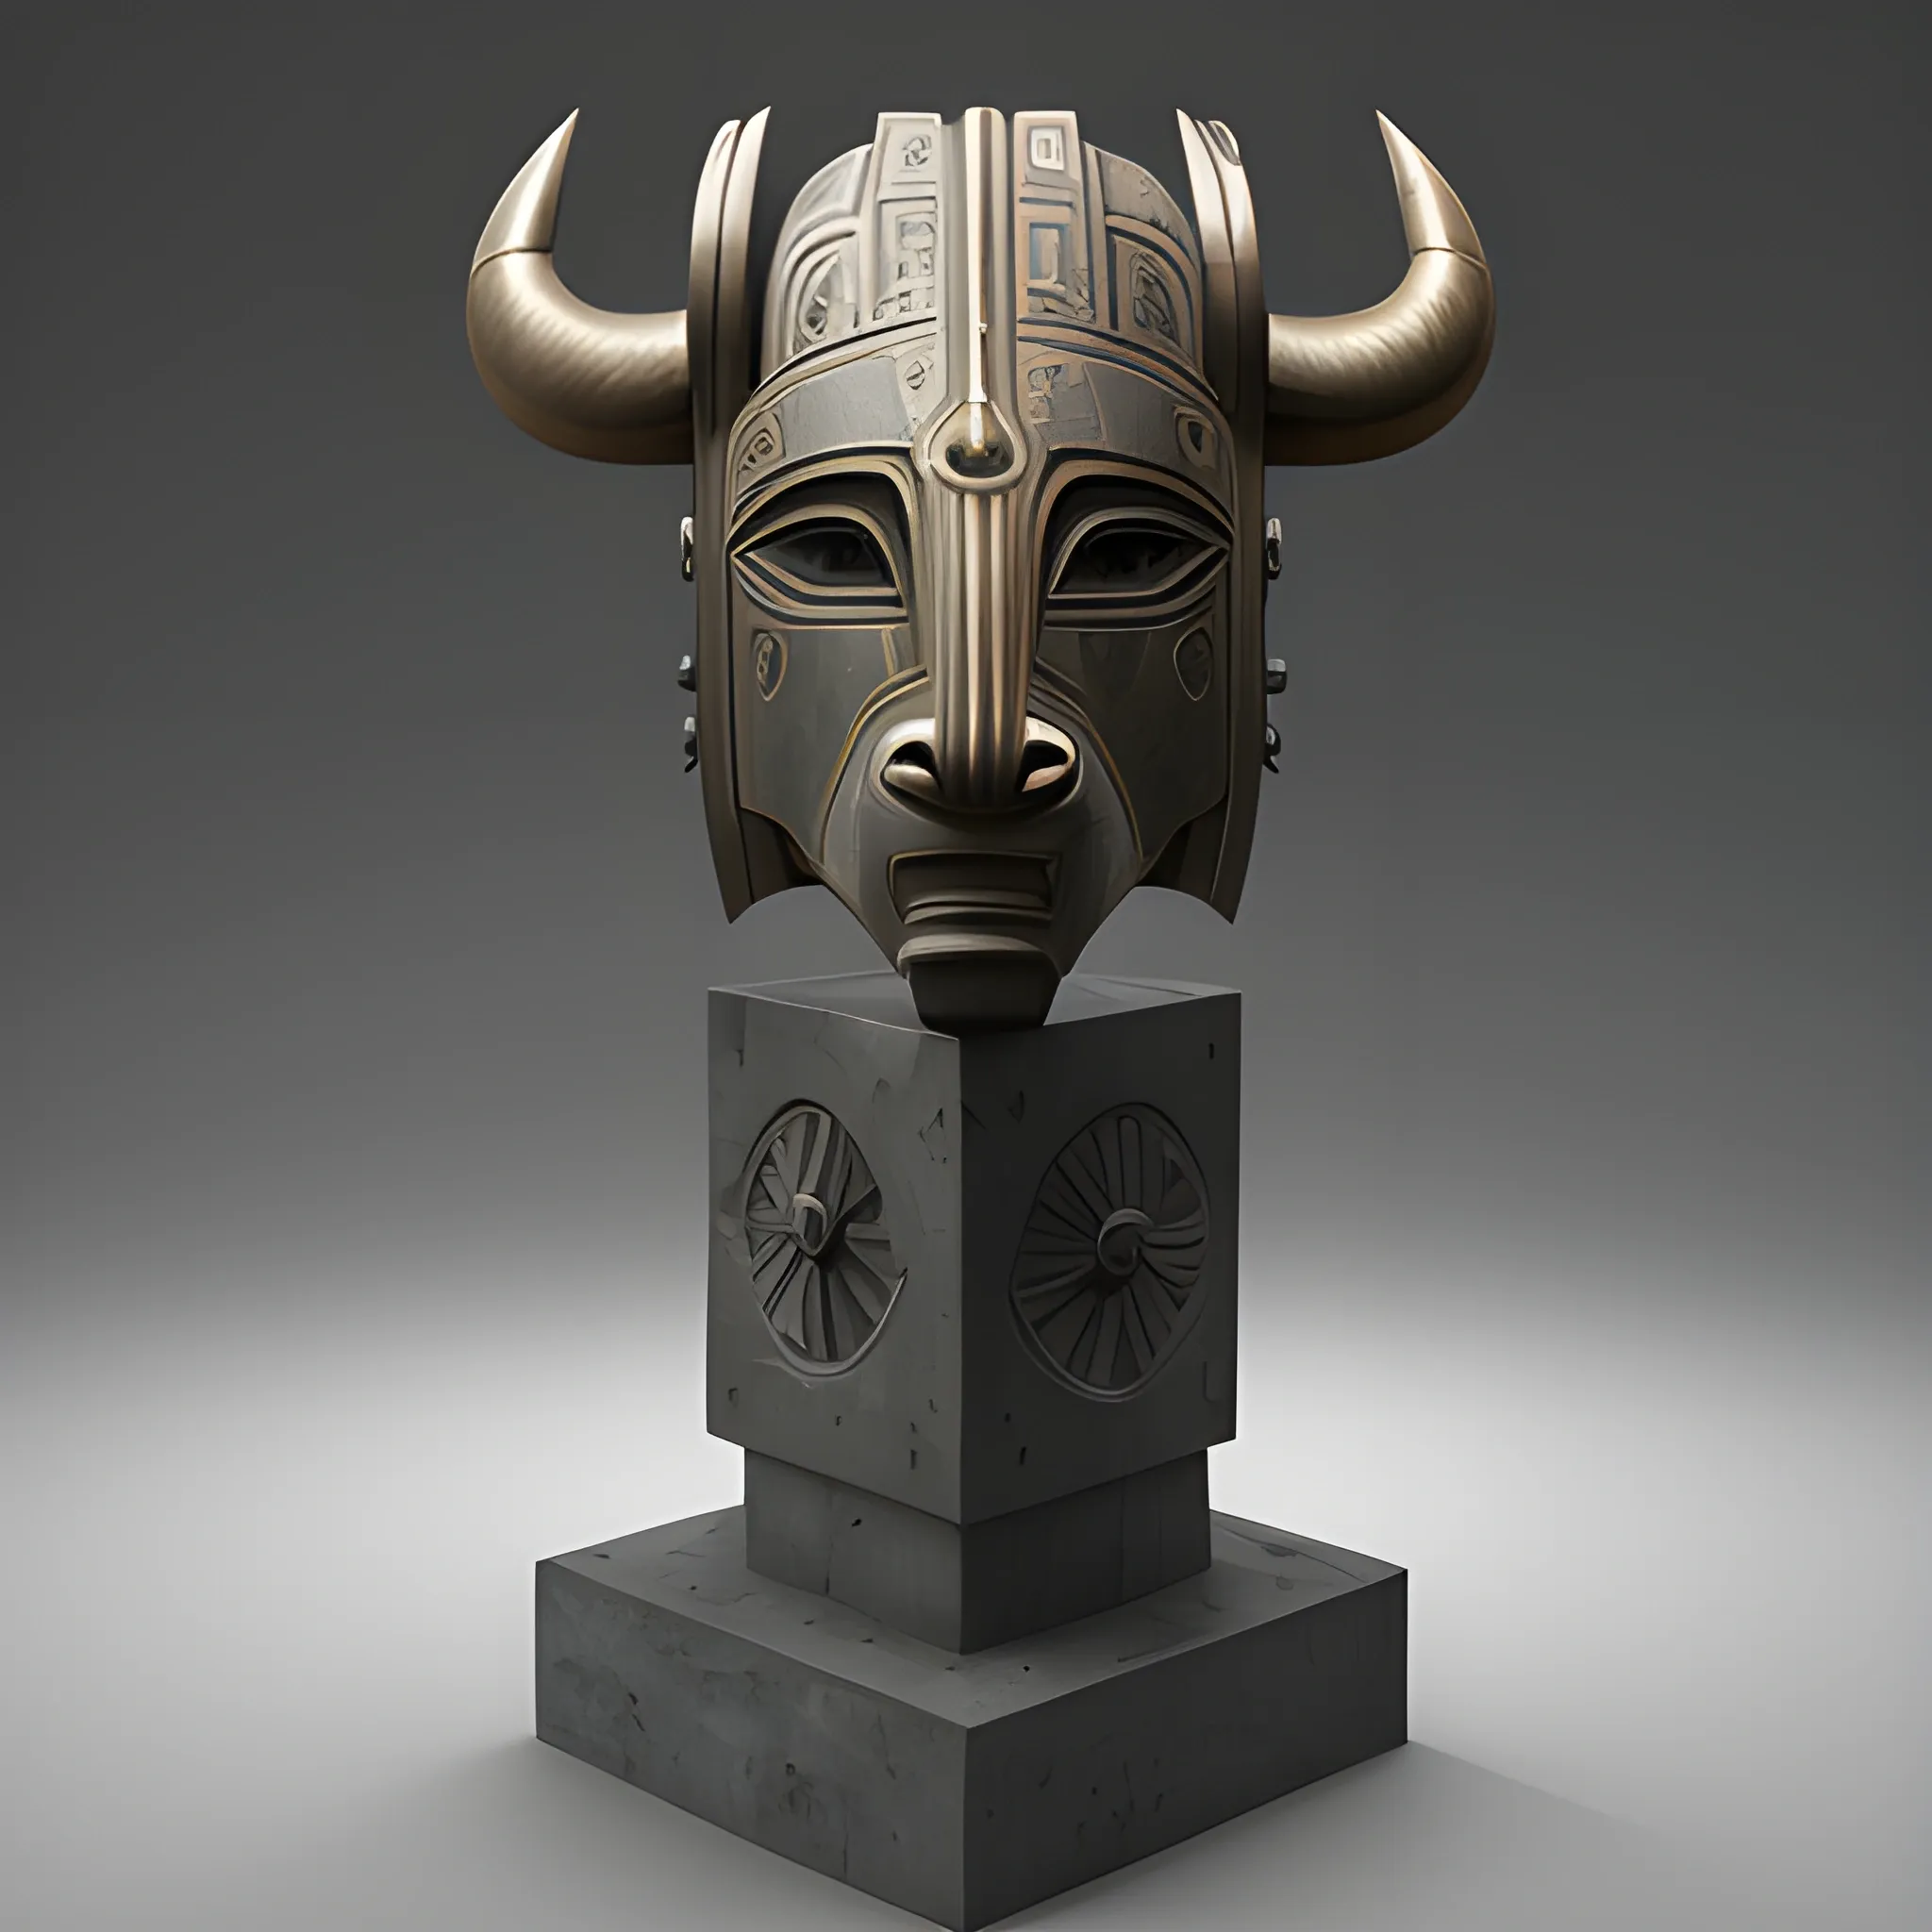 sculptural set in Brancusi style , Big metalical Bison featured native polynesian mask, gear and riveted steel, digital matte realistic surface, sharp focus, elegant intricate digital painting, abstract concept, art global illumination, ray tracing advanced technology, simple composition, elegant shapes, glam monumental, low perspective look

